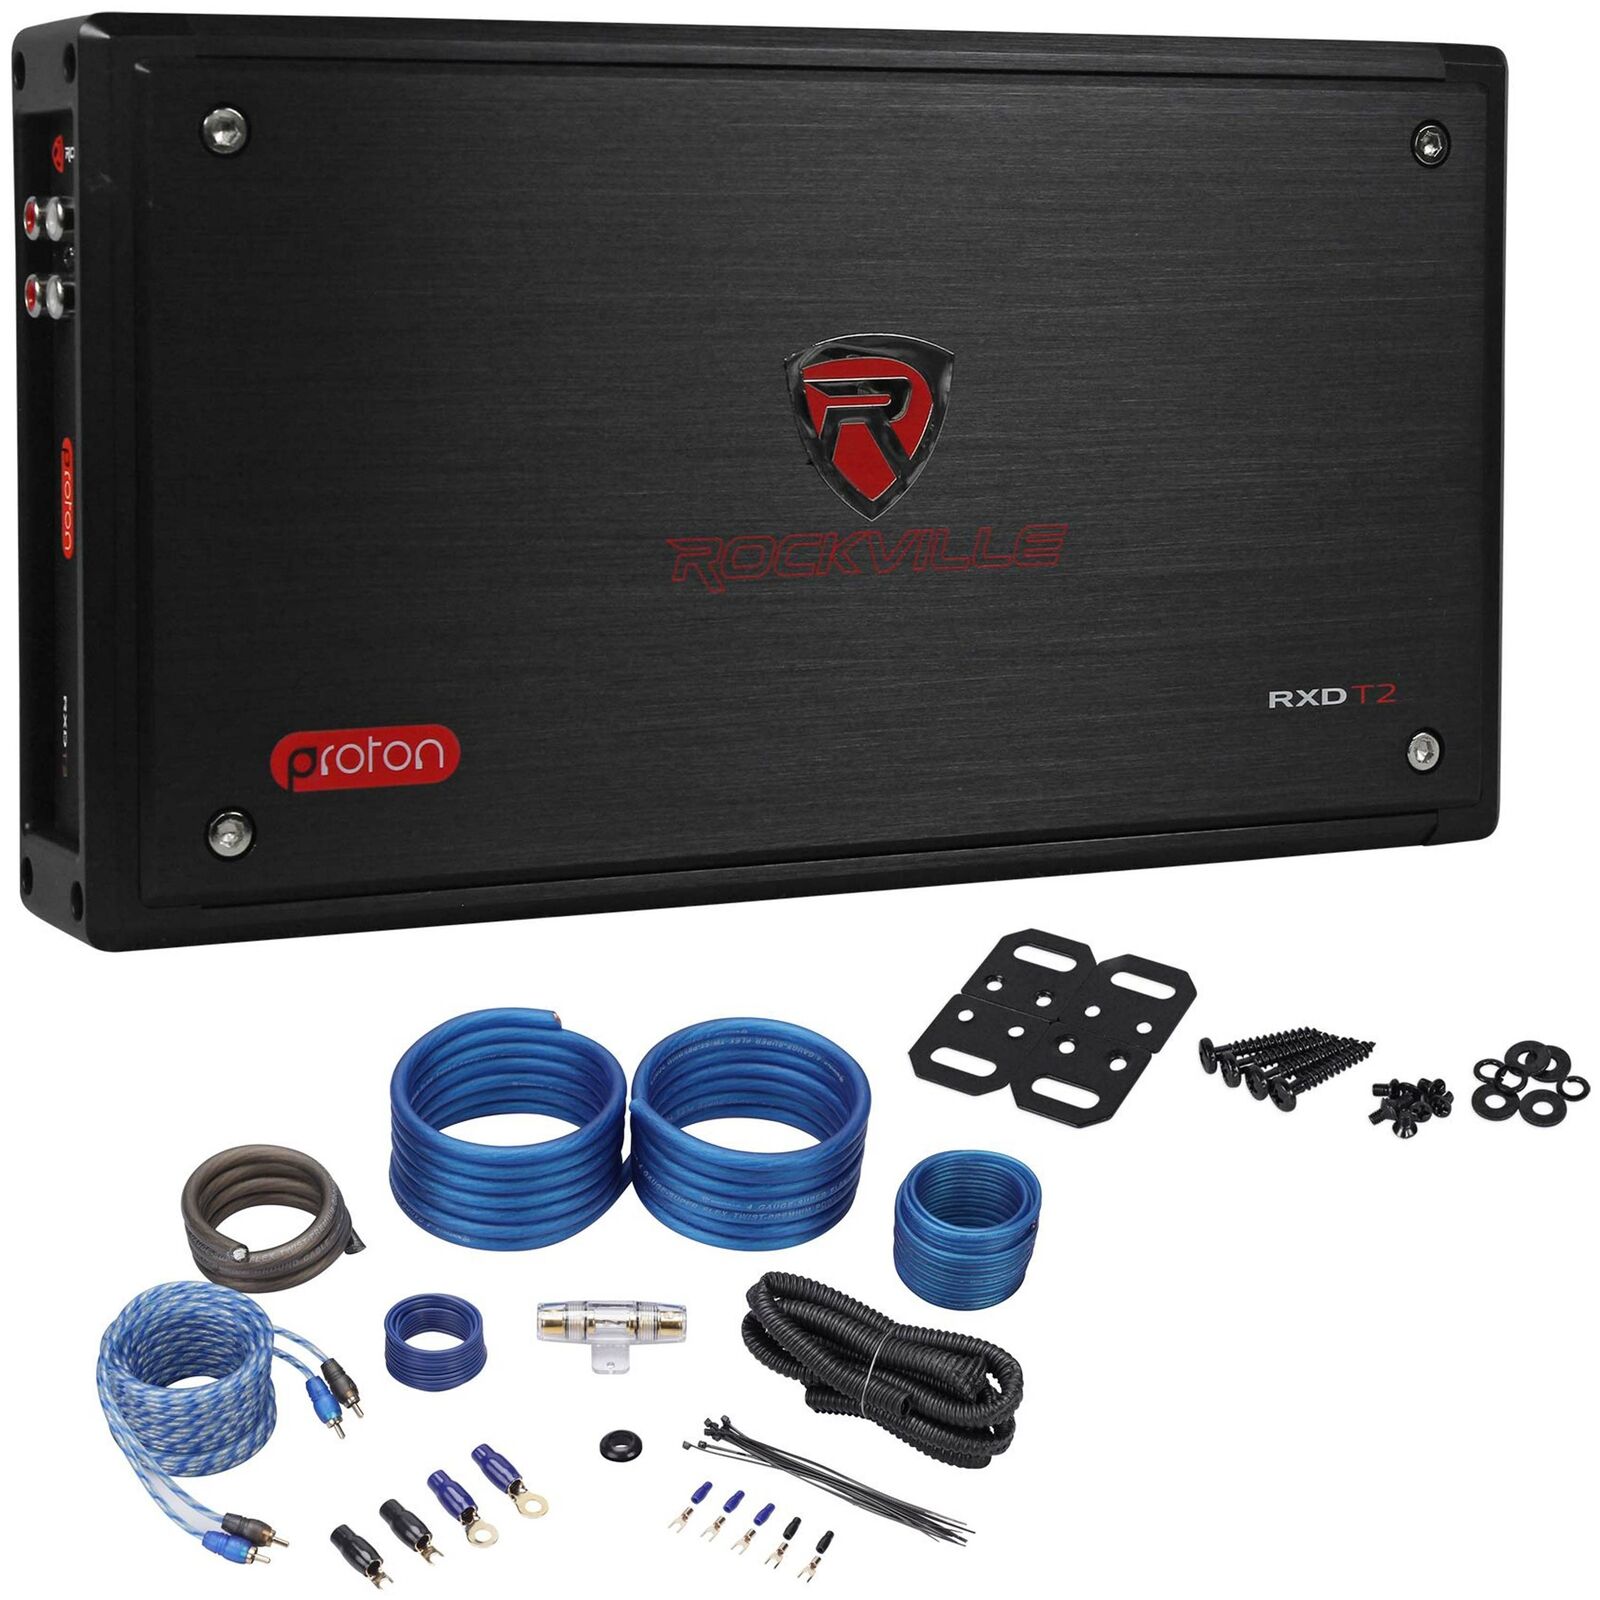 Rockville RXD-T2 Micro Car Amplifier 2400w 2 Channel 2x600W Rated+Amp Kit